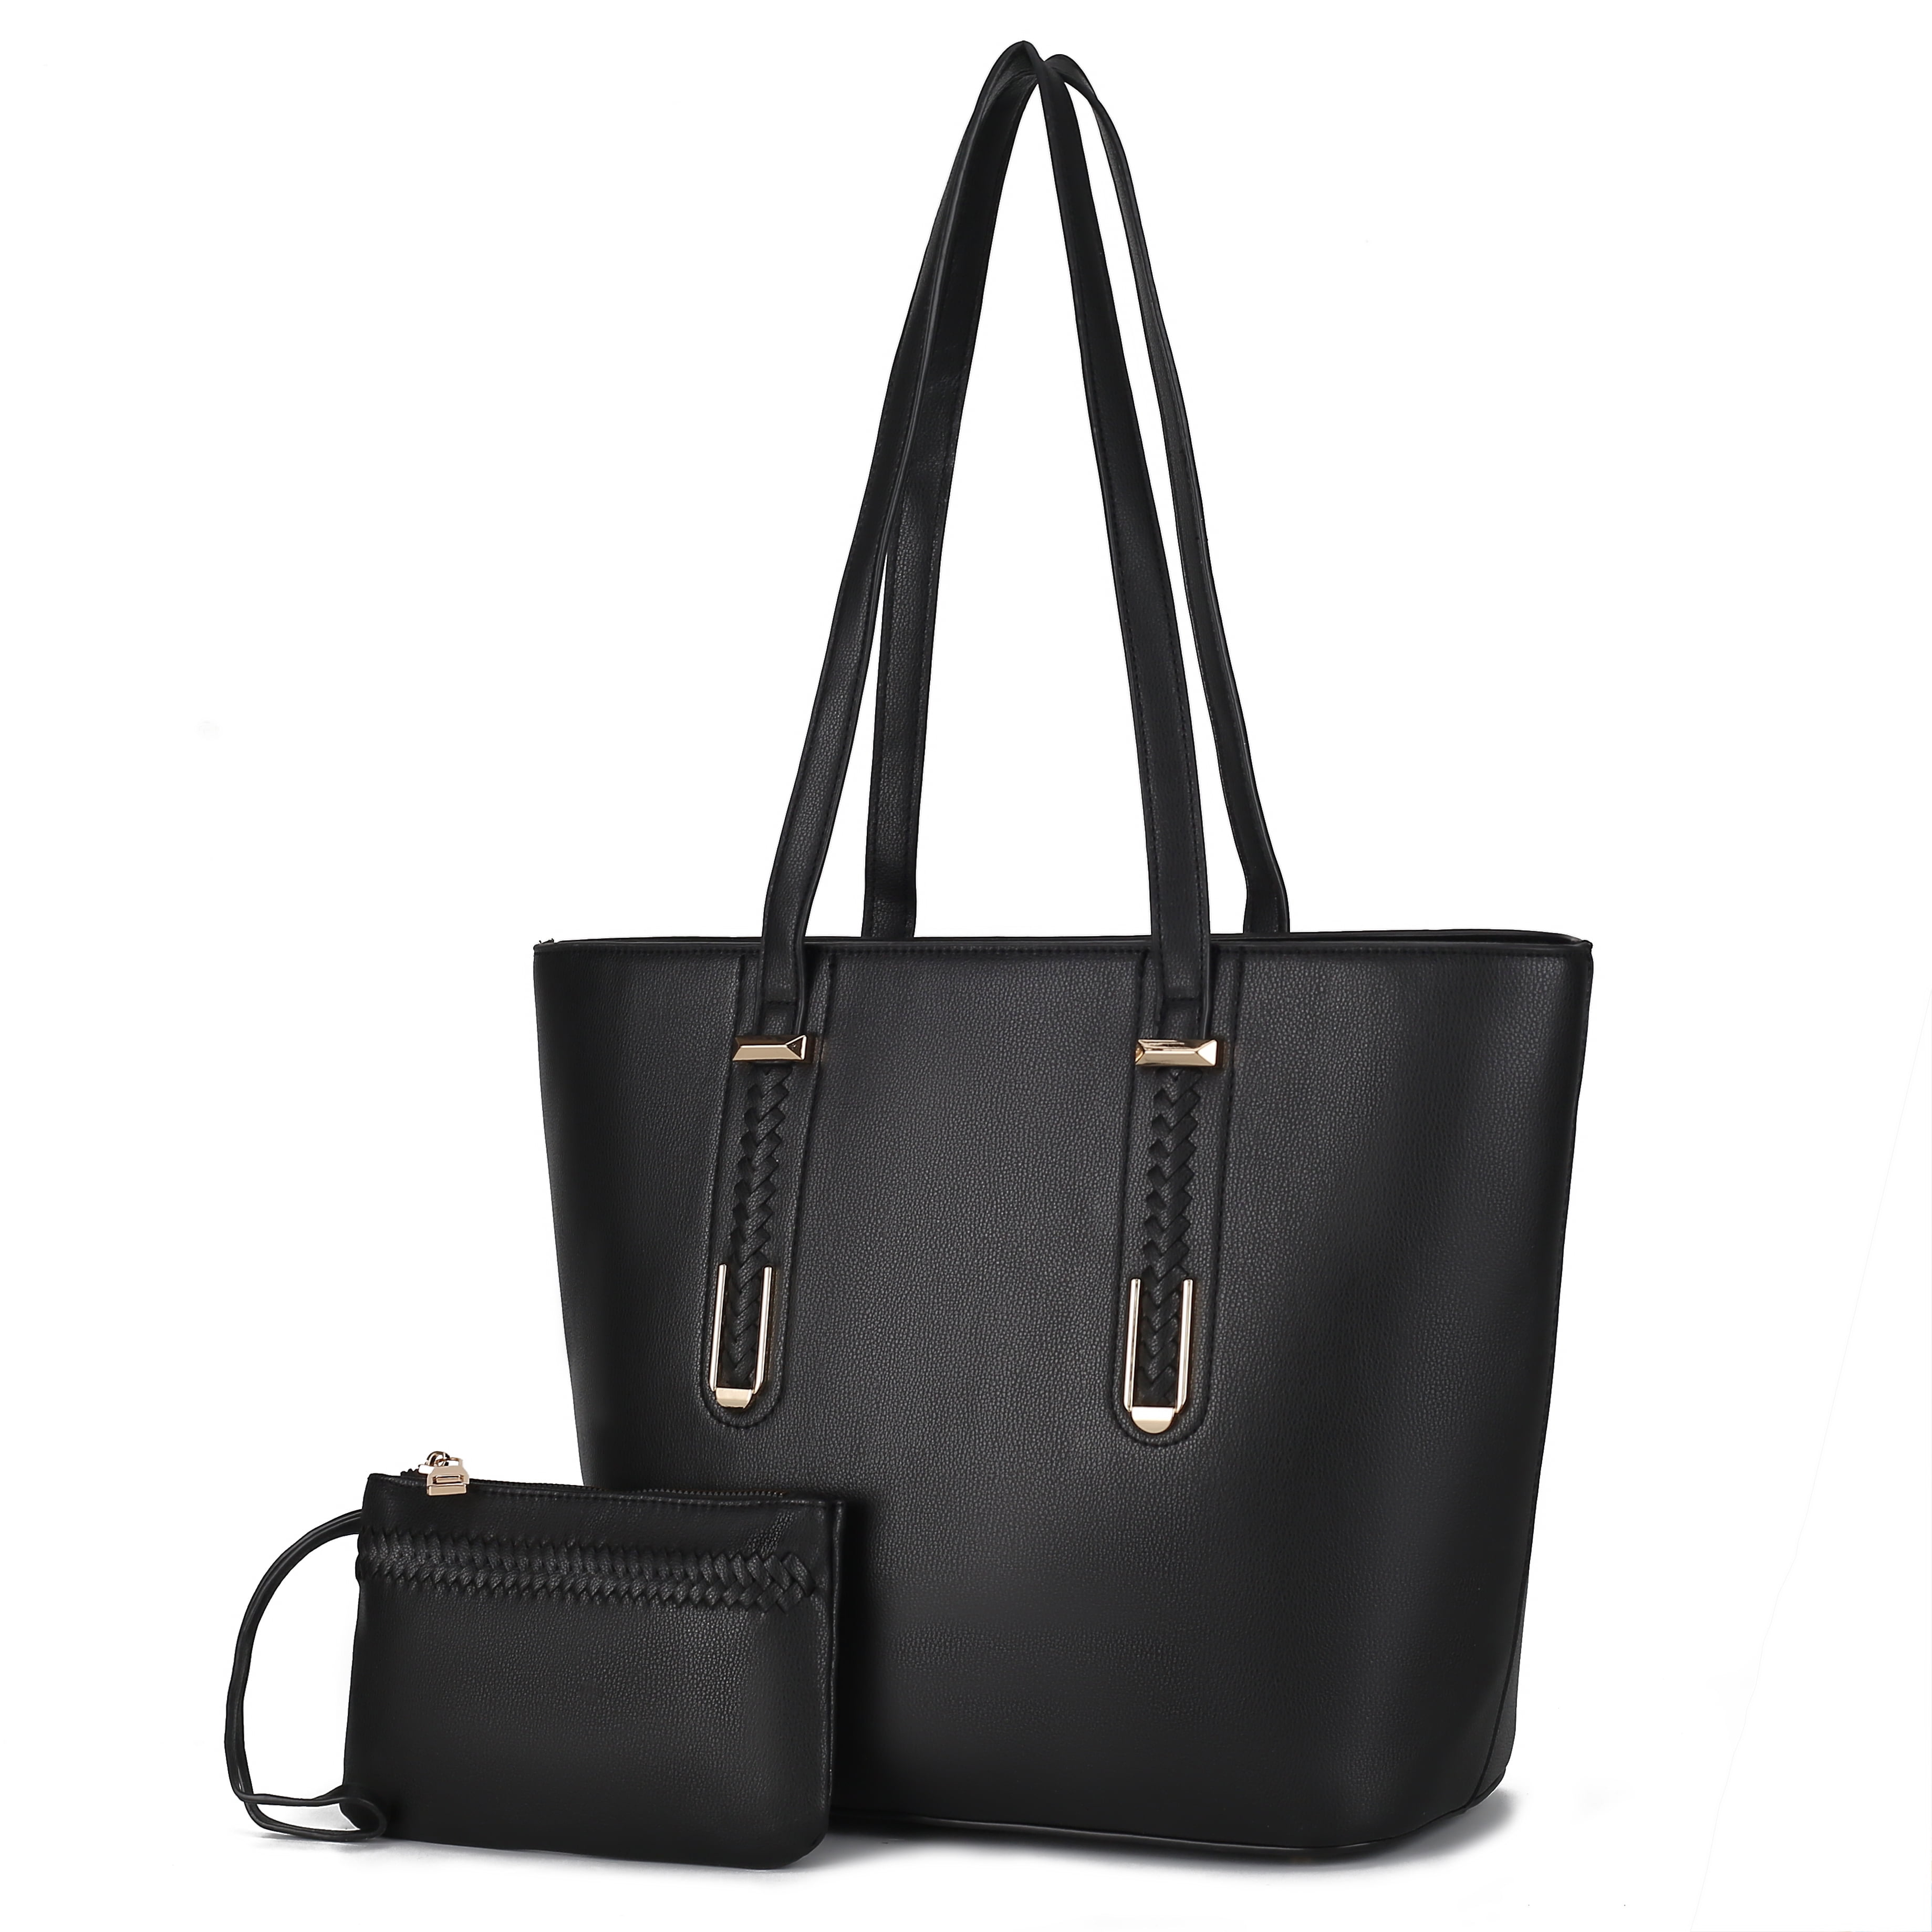 MKF Collection Mina Vegan Leather Women’s Tote Bag by Mia K with Pouch ...